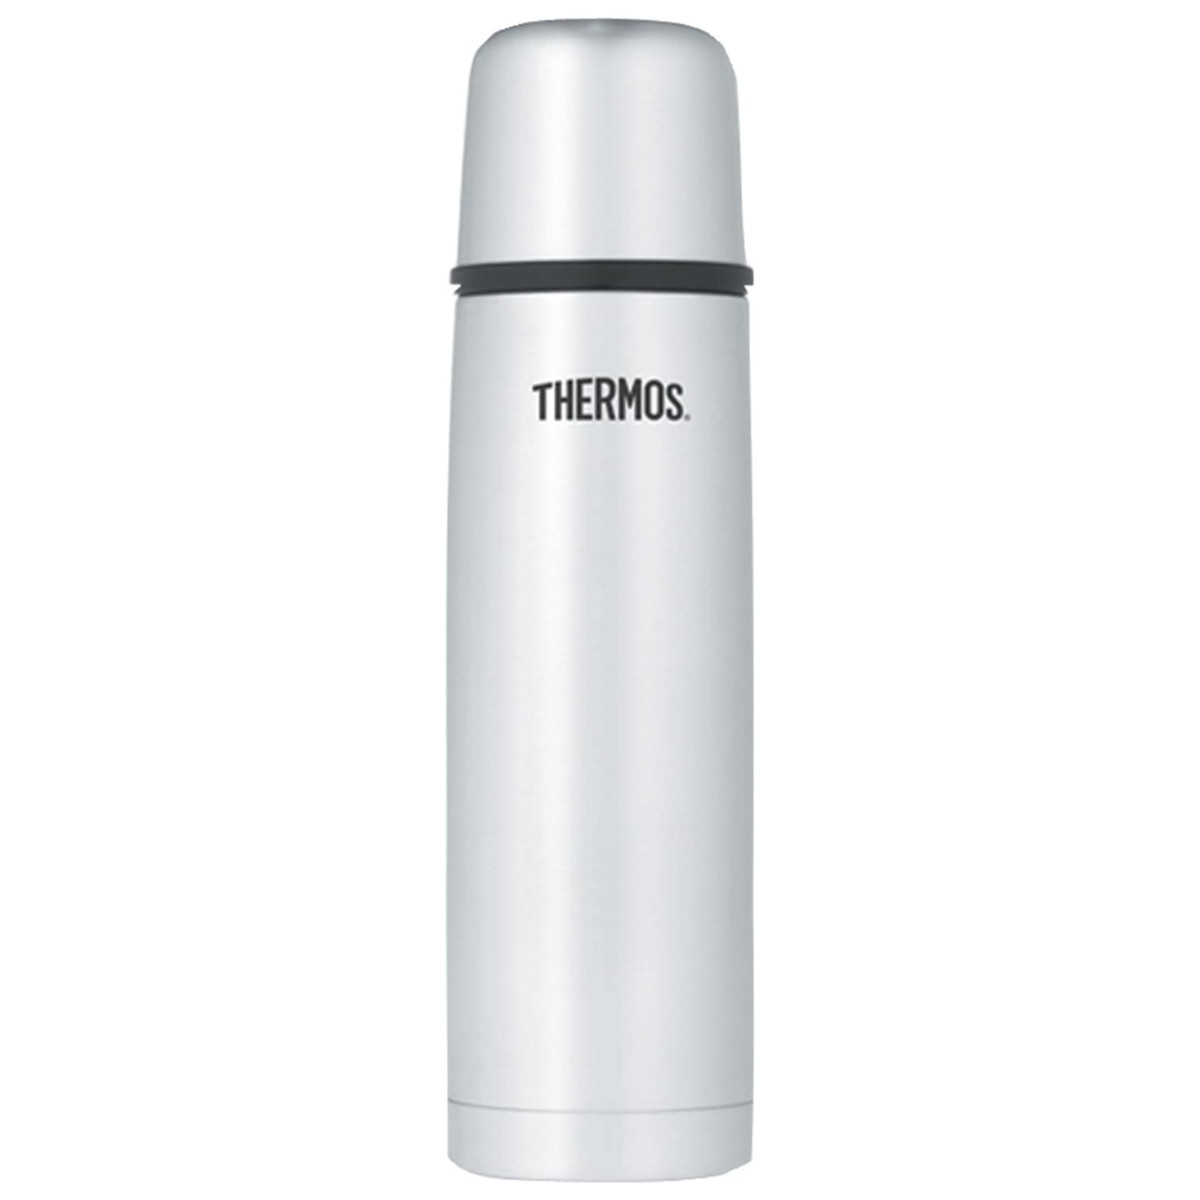 Thermos Compact Beverage Bottle